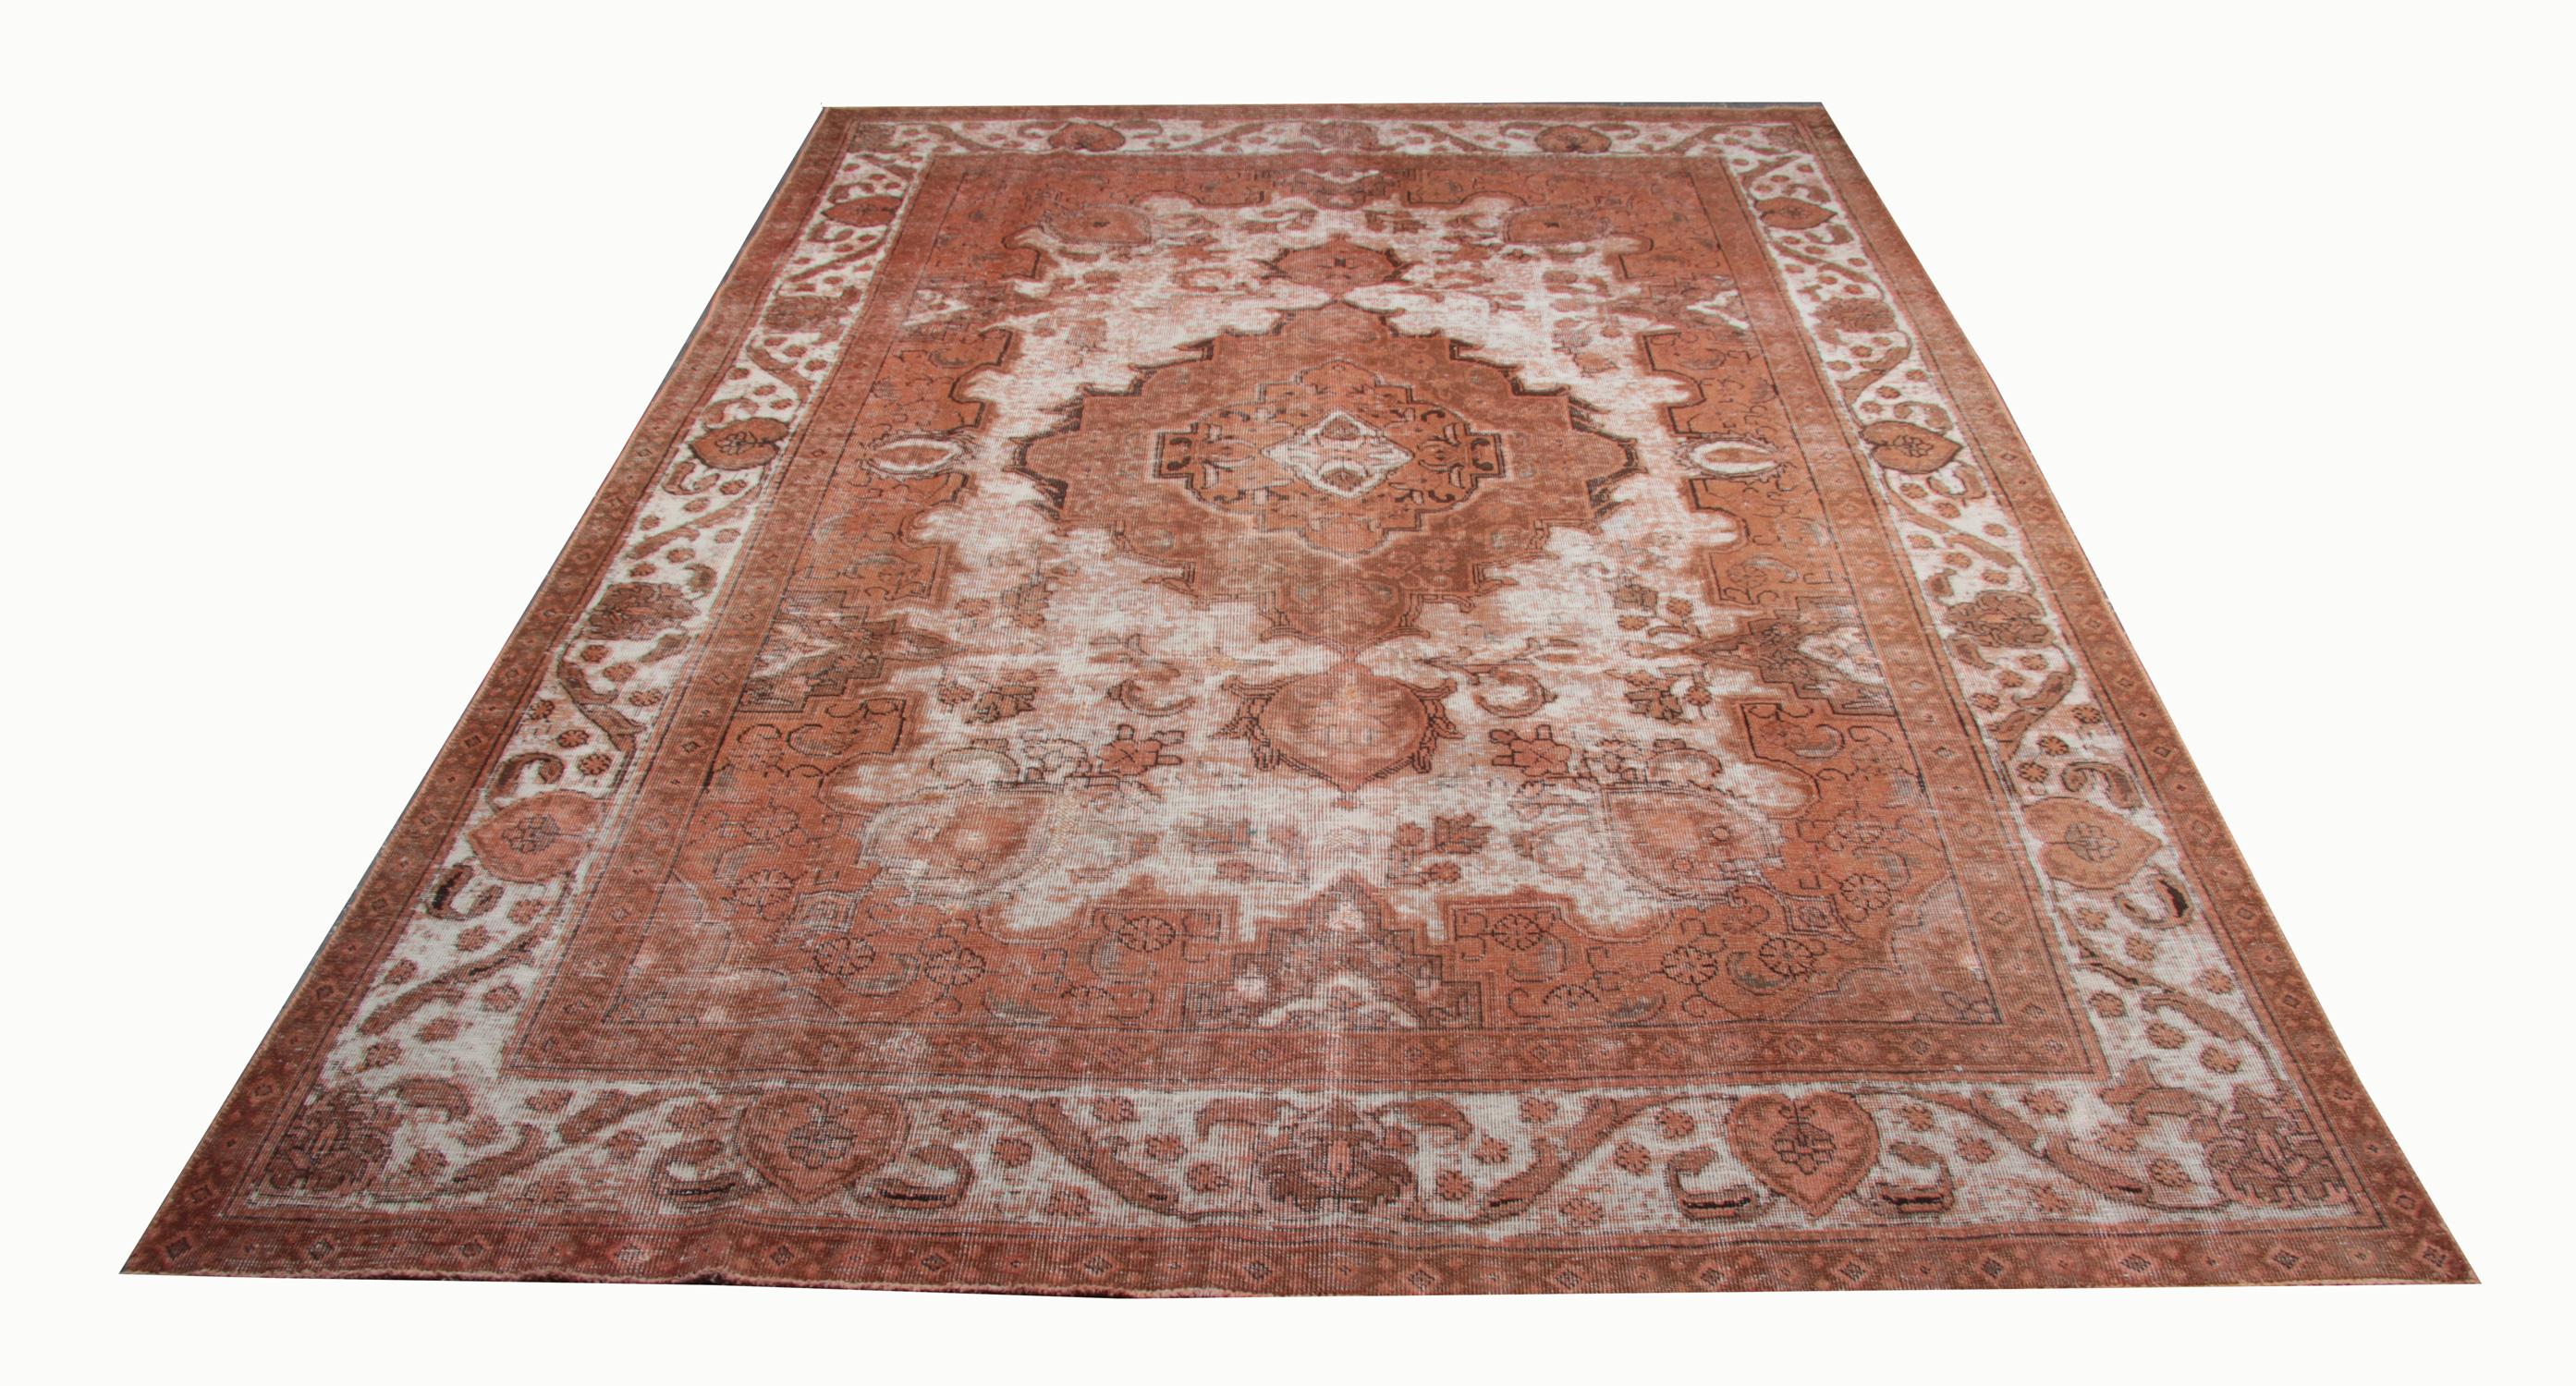 This oriental wool area rug was woven by hand in the late 20th century and features an exquisite medallion design. Symmetrically woven with an intricate design featuring floral and geometric elements. The colours are simple with a traditional rust